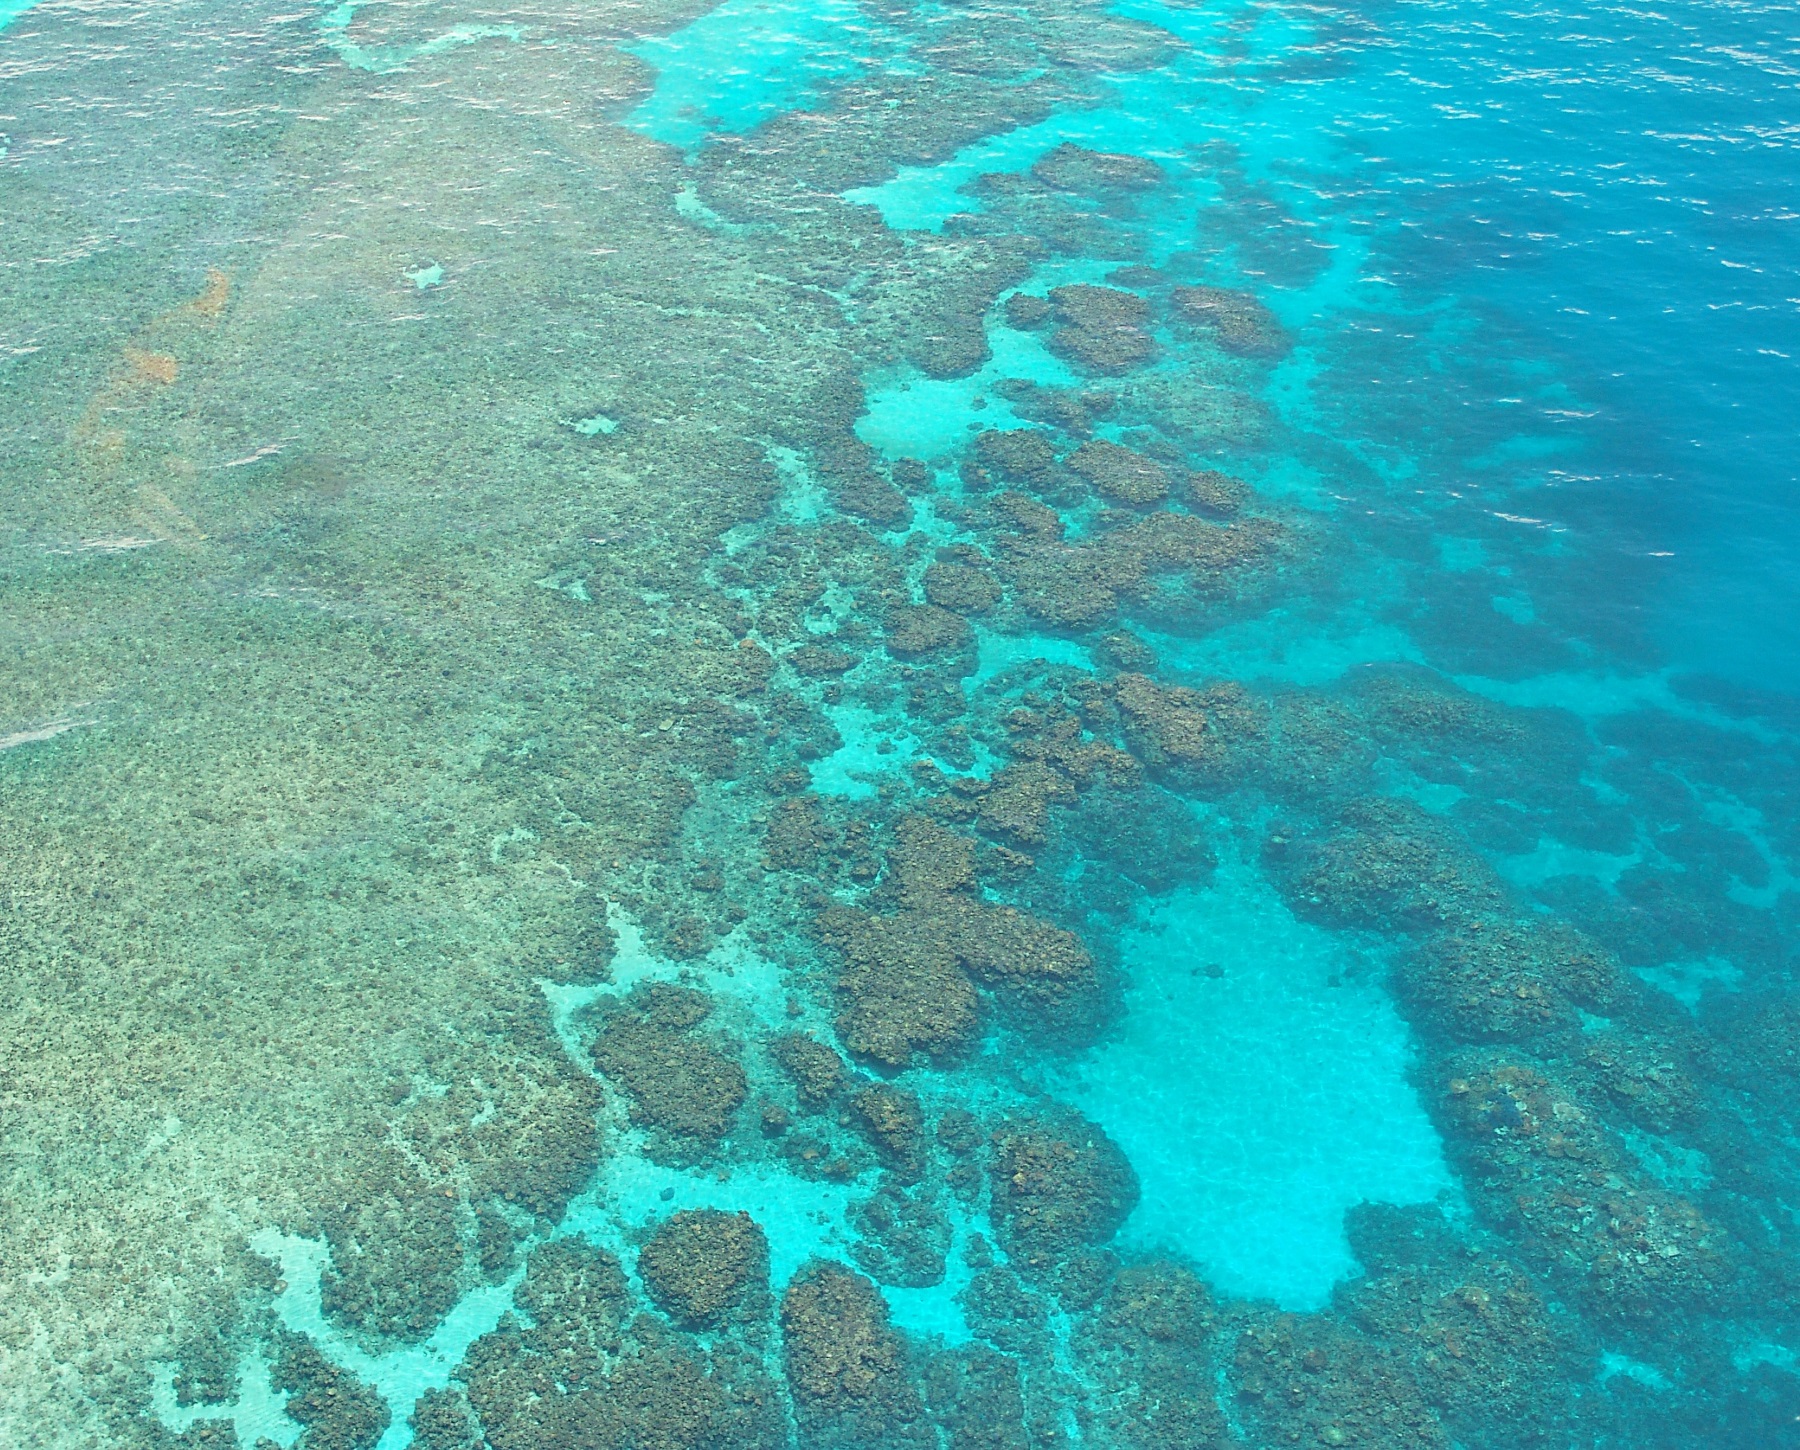 Looking down on a coral reef from the air